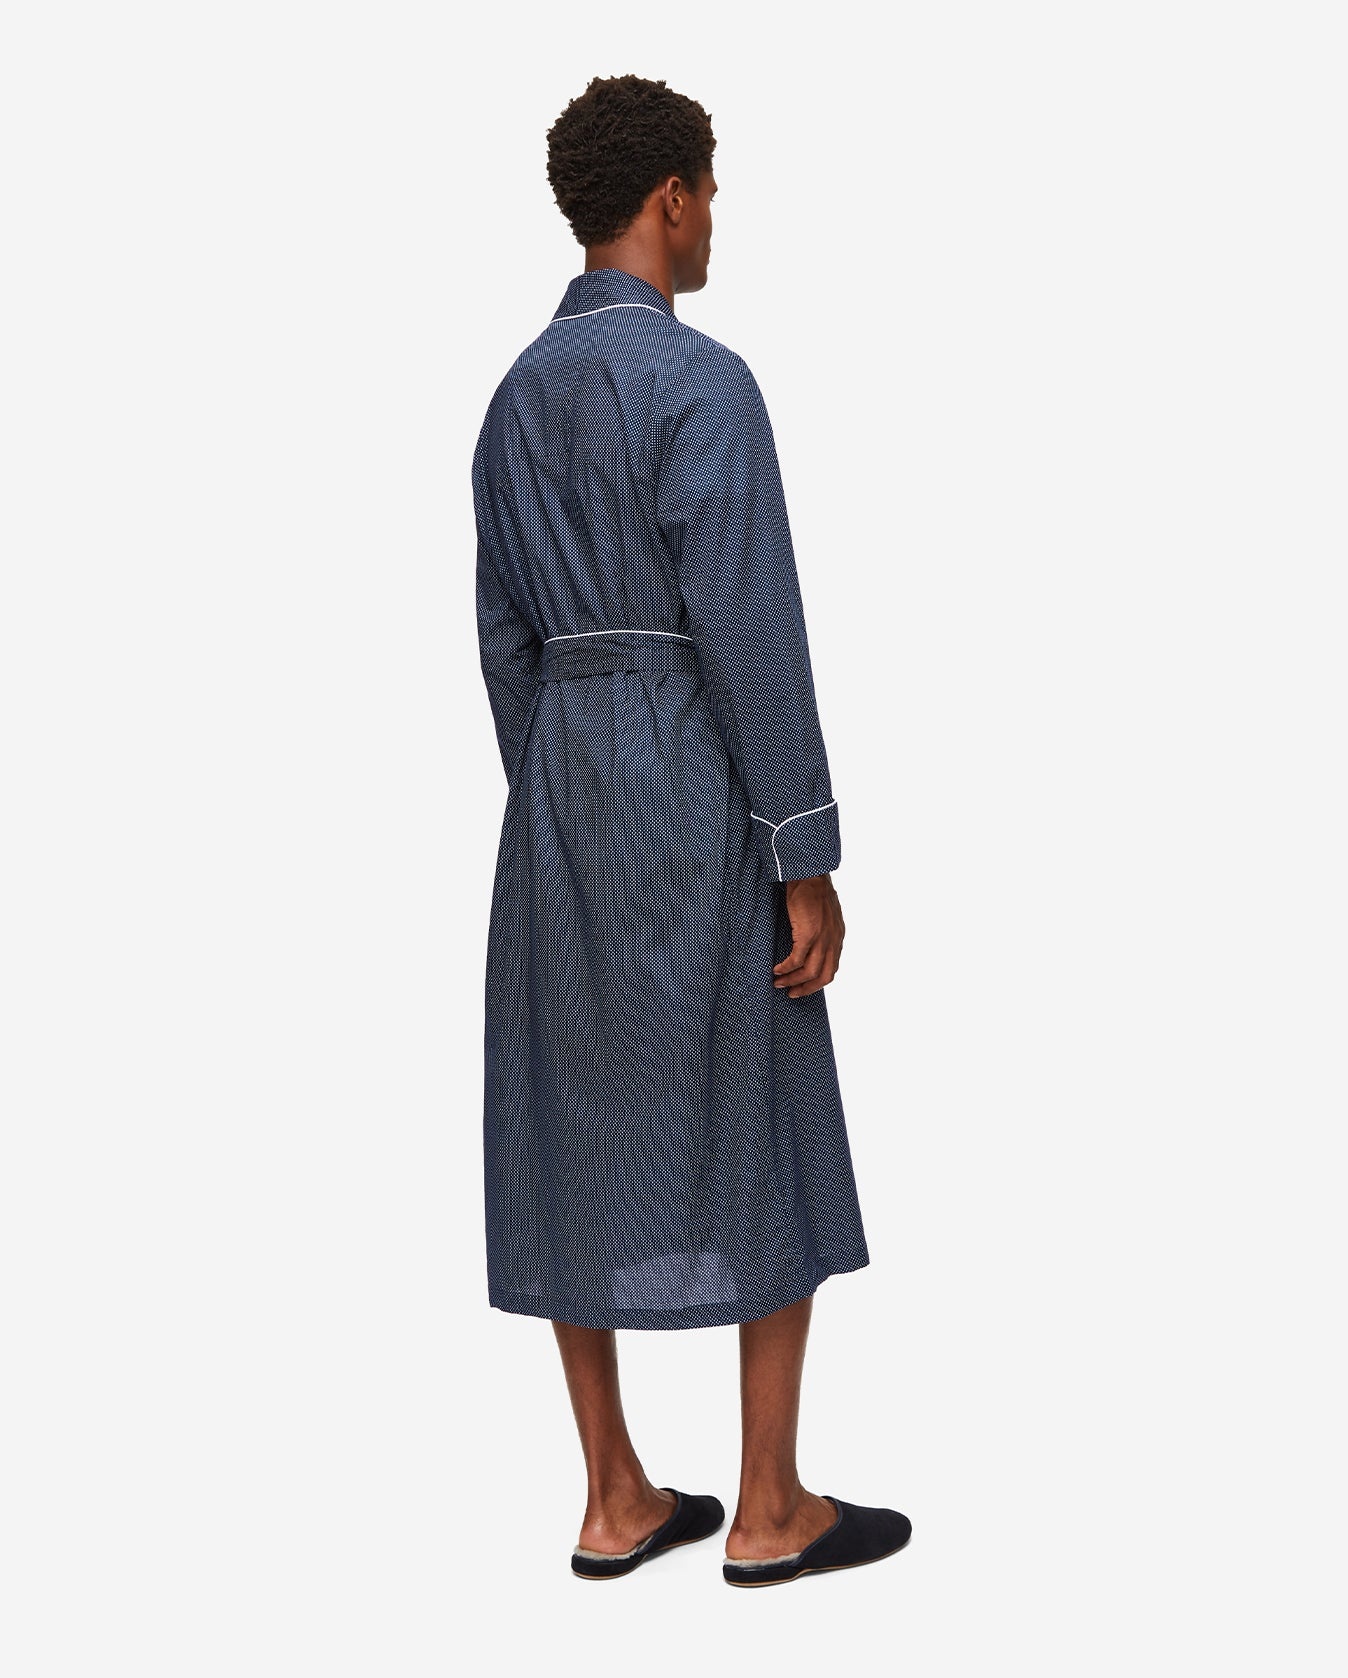 Plaza Robe With Piping - Navy - 2